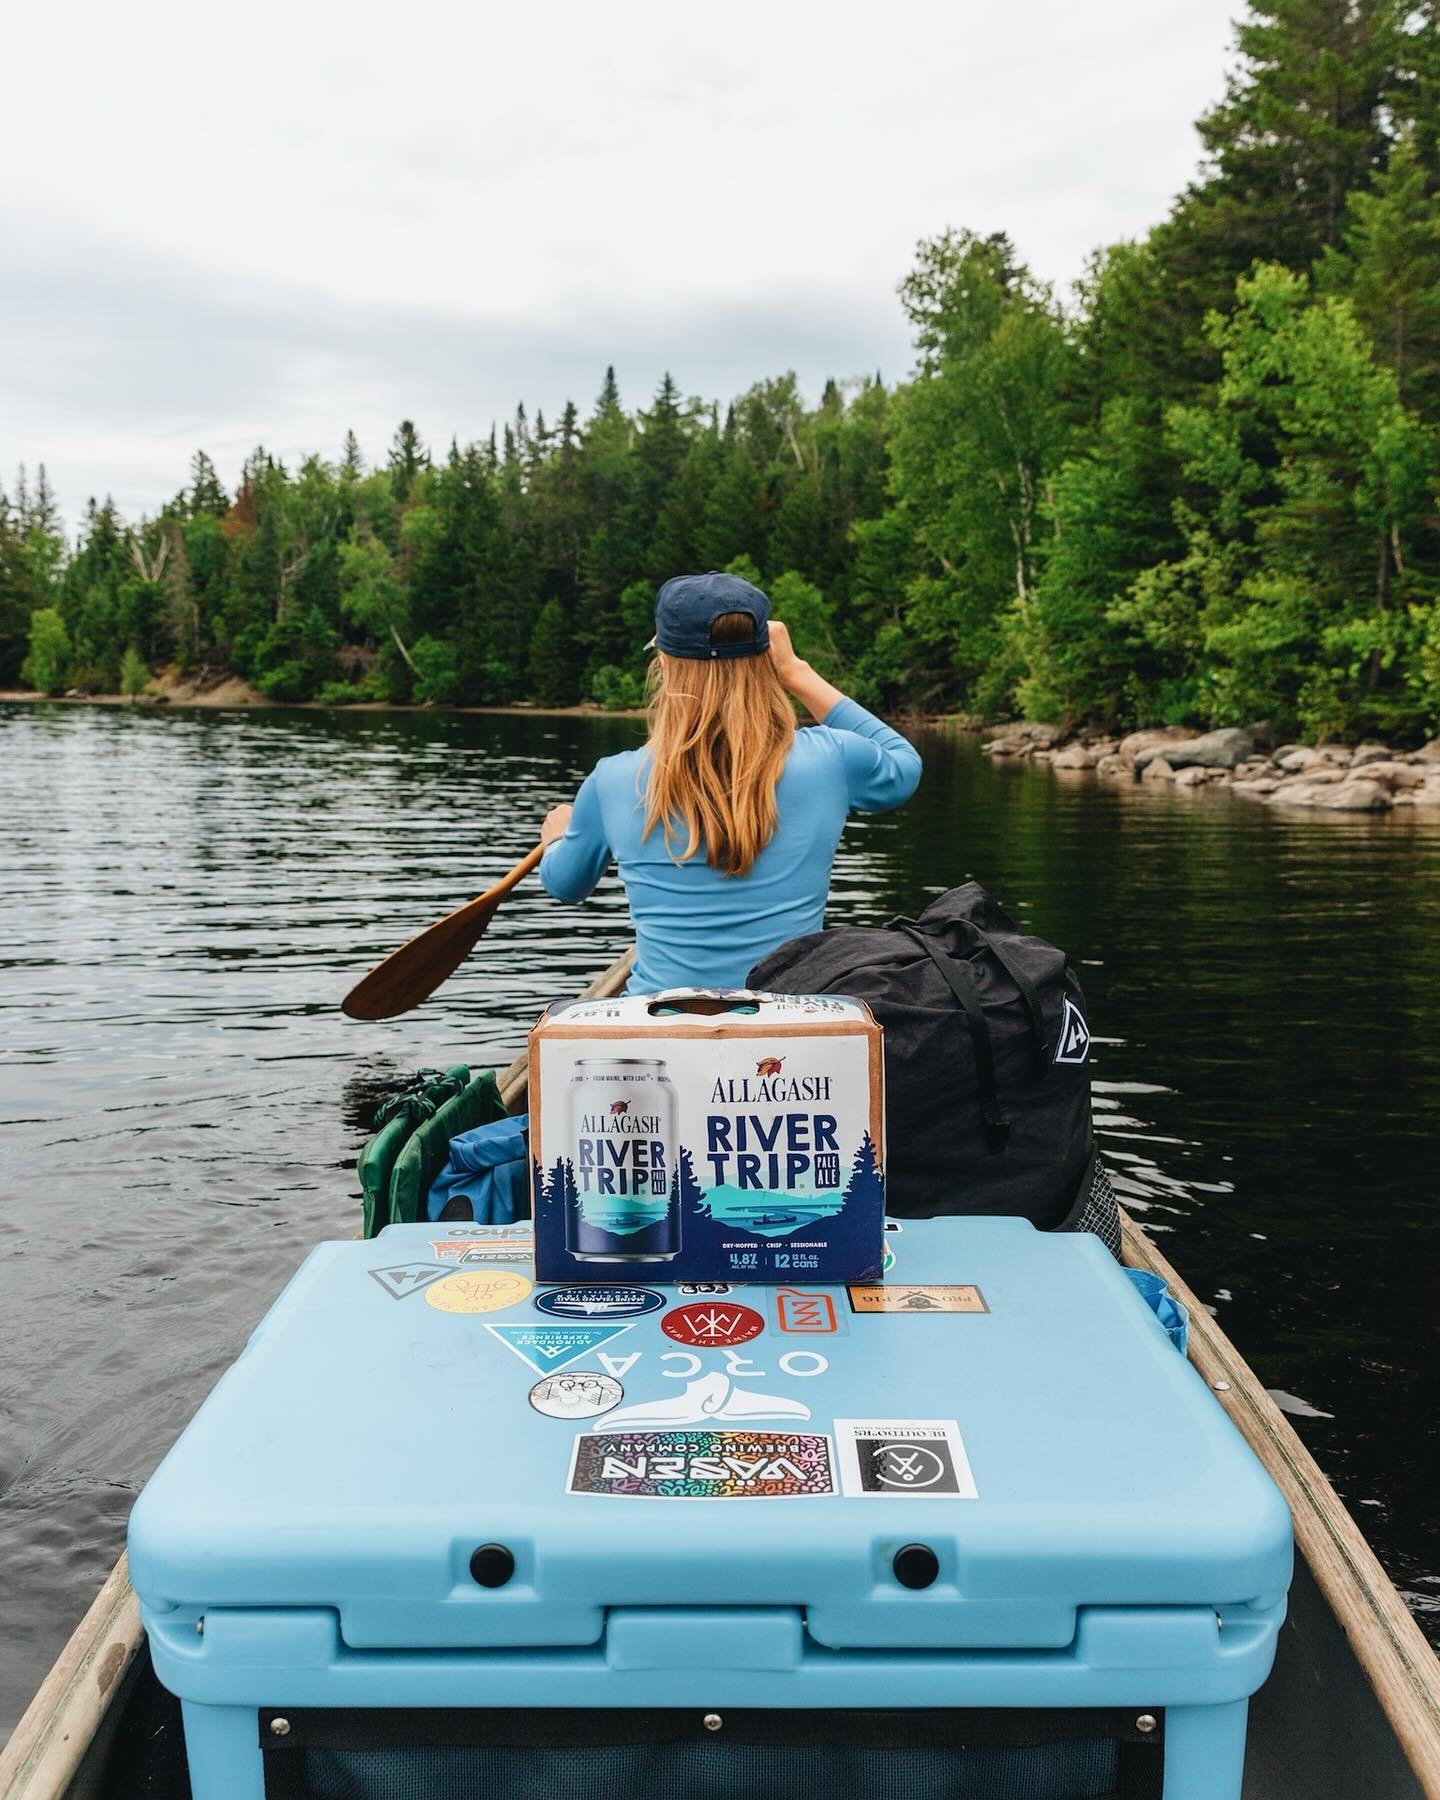 SUMMER CONTENT OFFER! 🍉

Anyone else dreaming of summer adventures on this dreary Maine day? As I plan for some fun excursions around the state, from sea kayaking on the coast to canoe camping inland and lots in between, I&rsquo;m putting together a